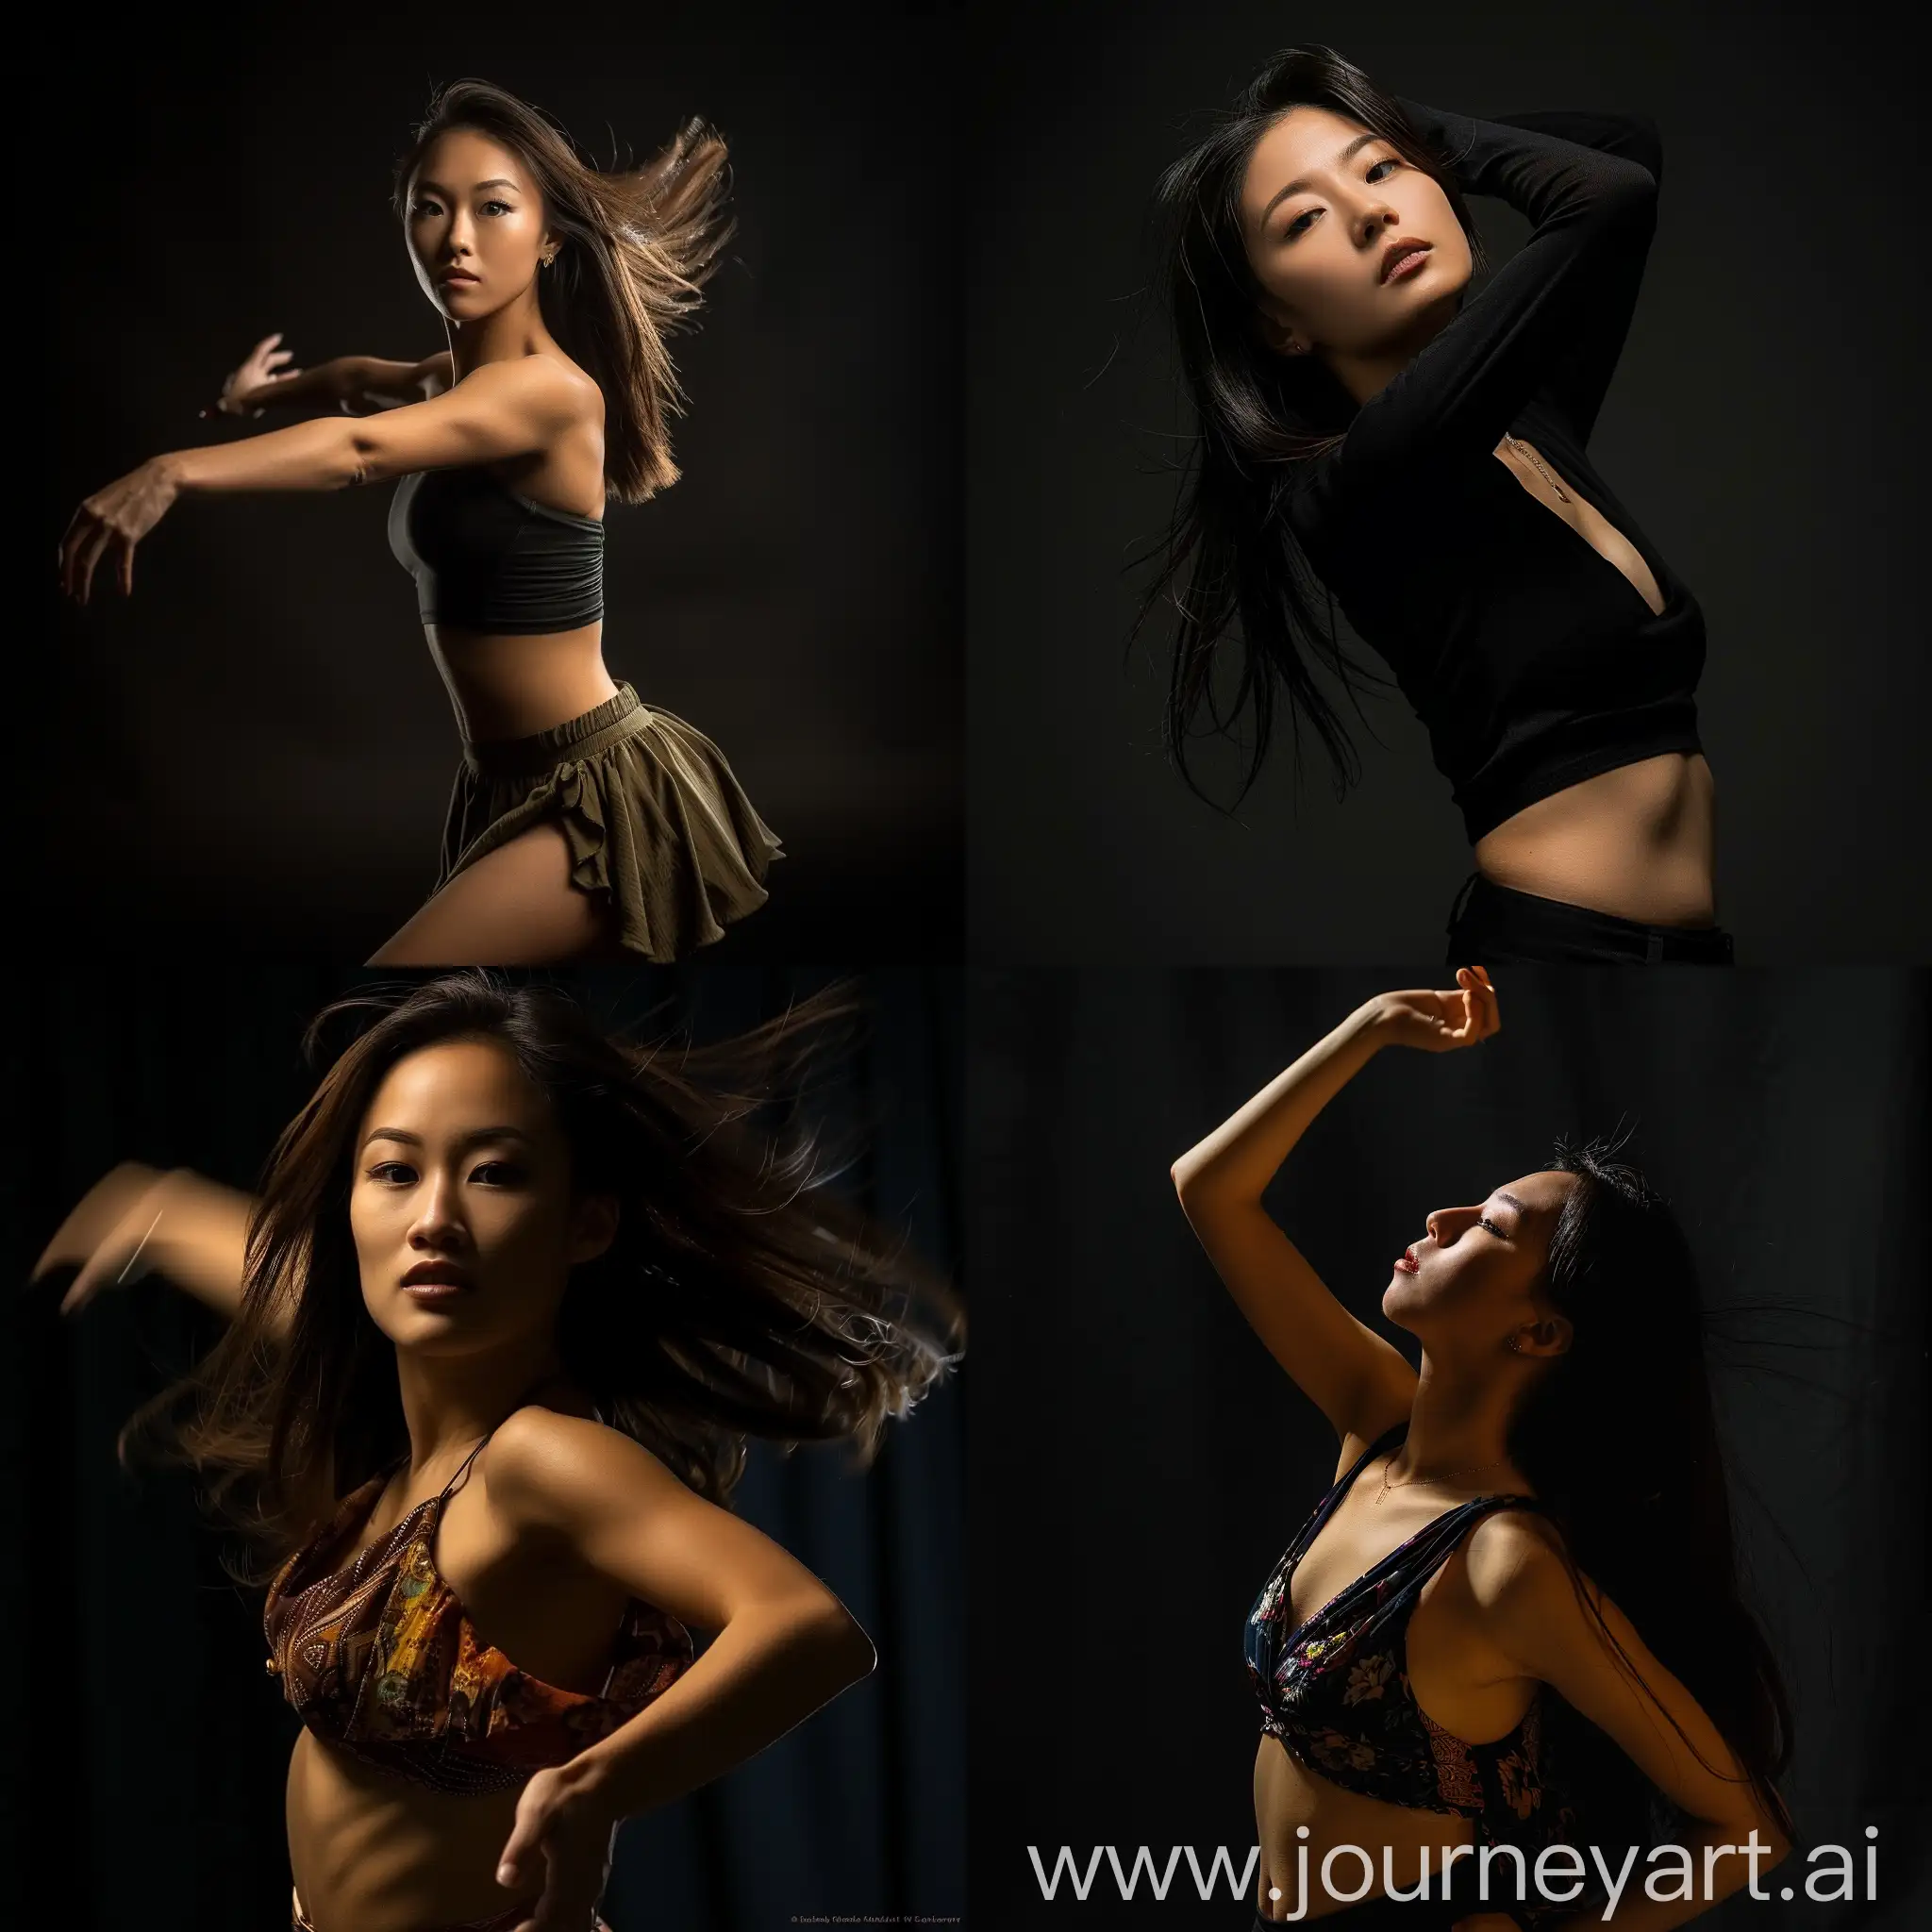 Dynamic-Pose-of-Beautiful-Asian-Woman-in-Photo-with-Striking-Lighting